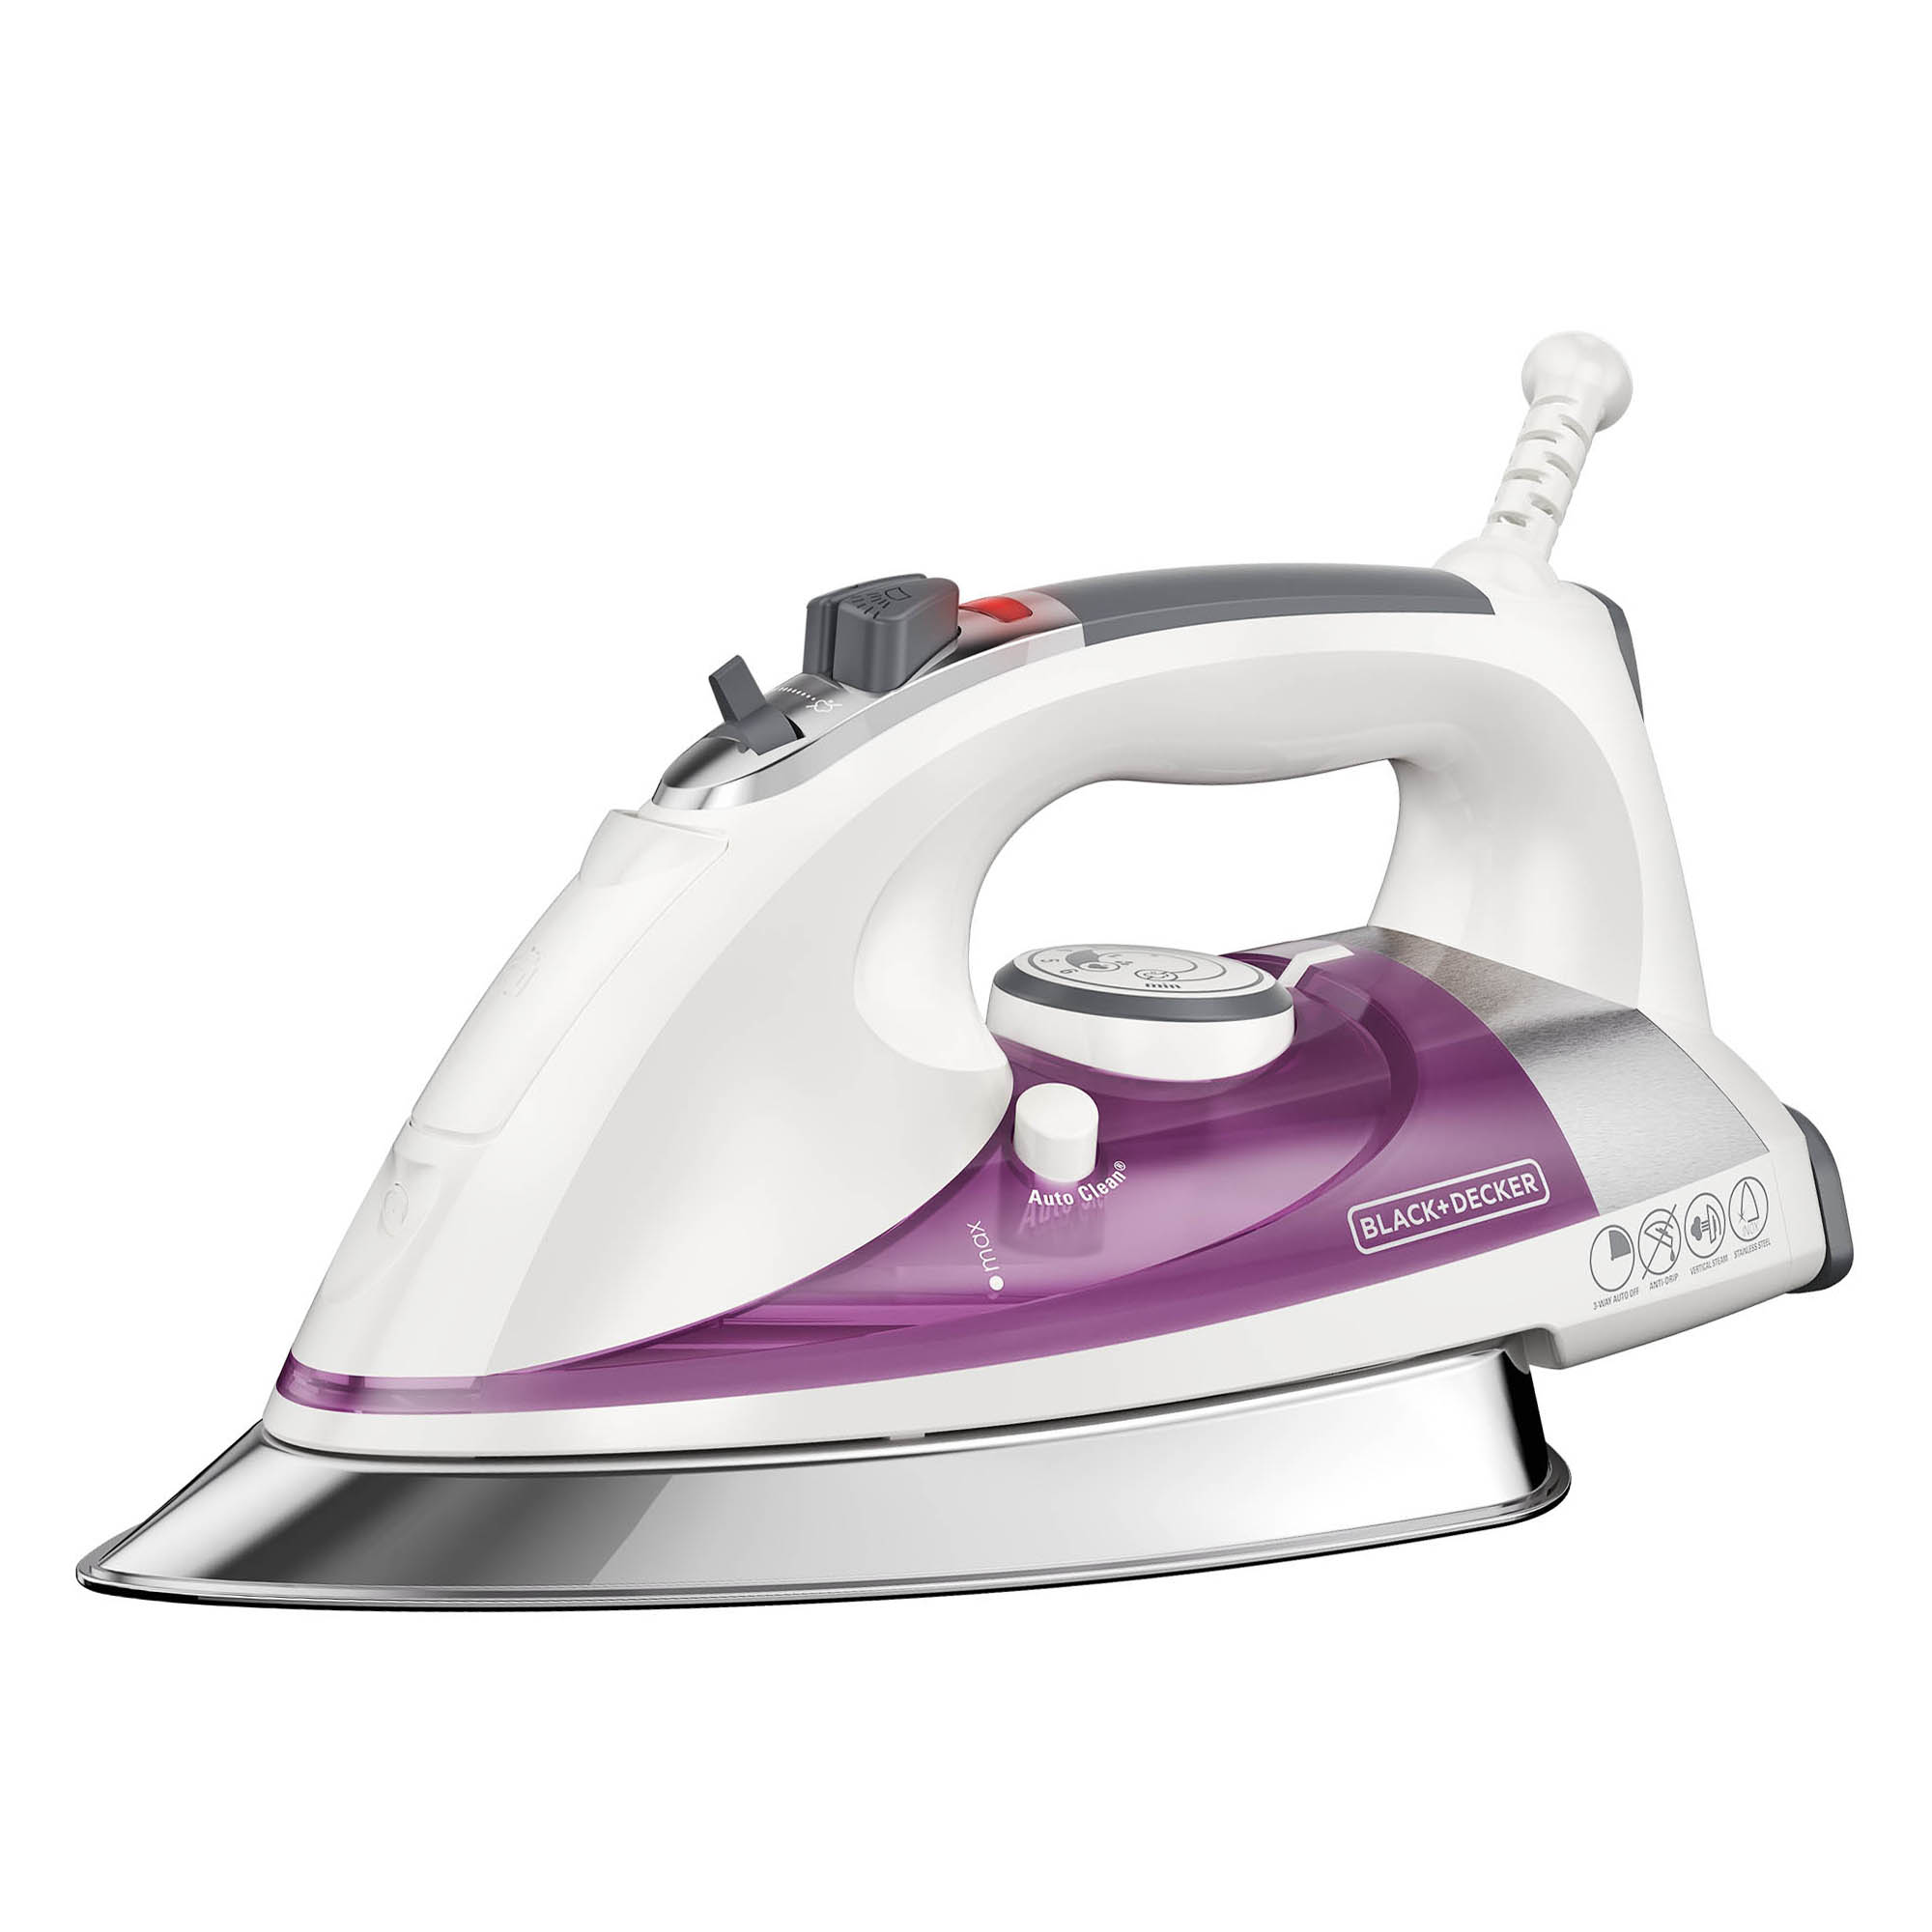 IR1350S-T Professional Steam Iron with Stainless Steel Soleplate, Purple